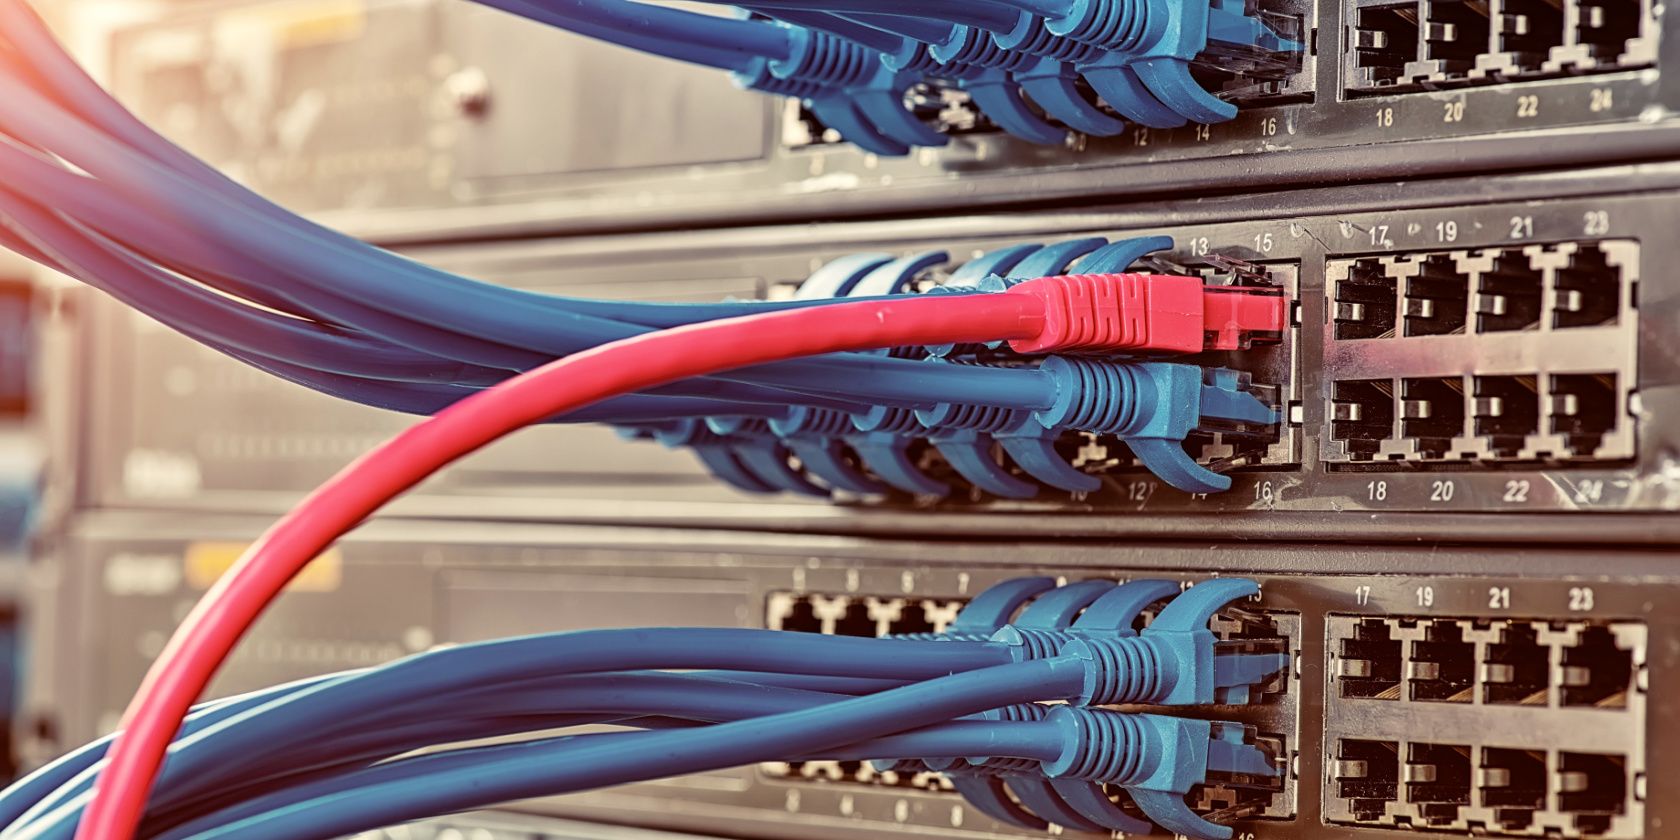 ethernet cables plugged into server ports feature